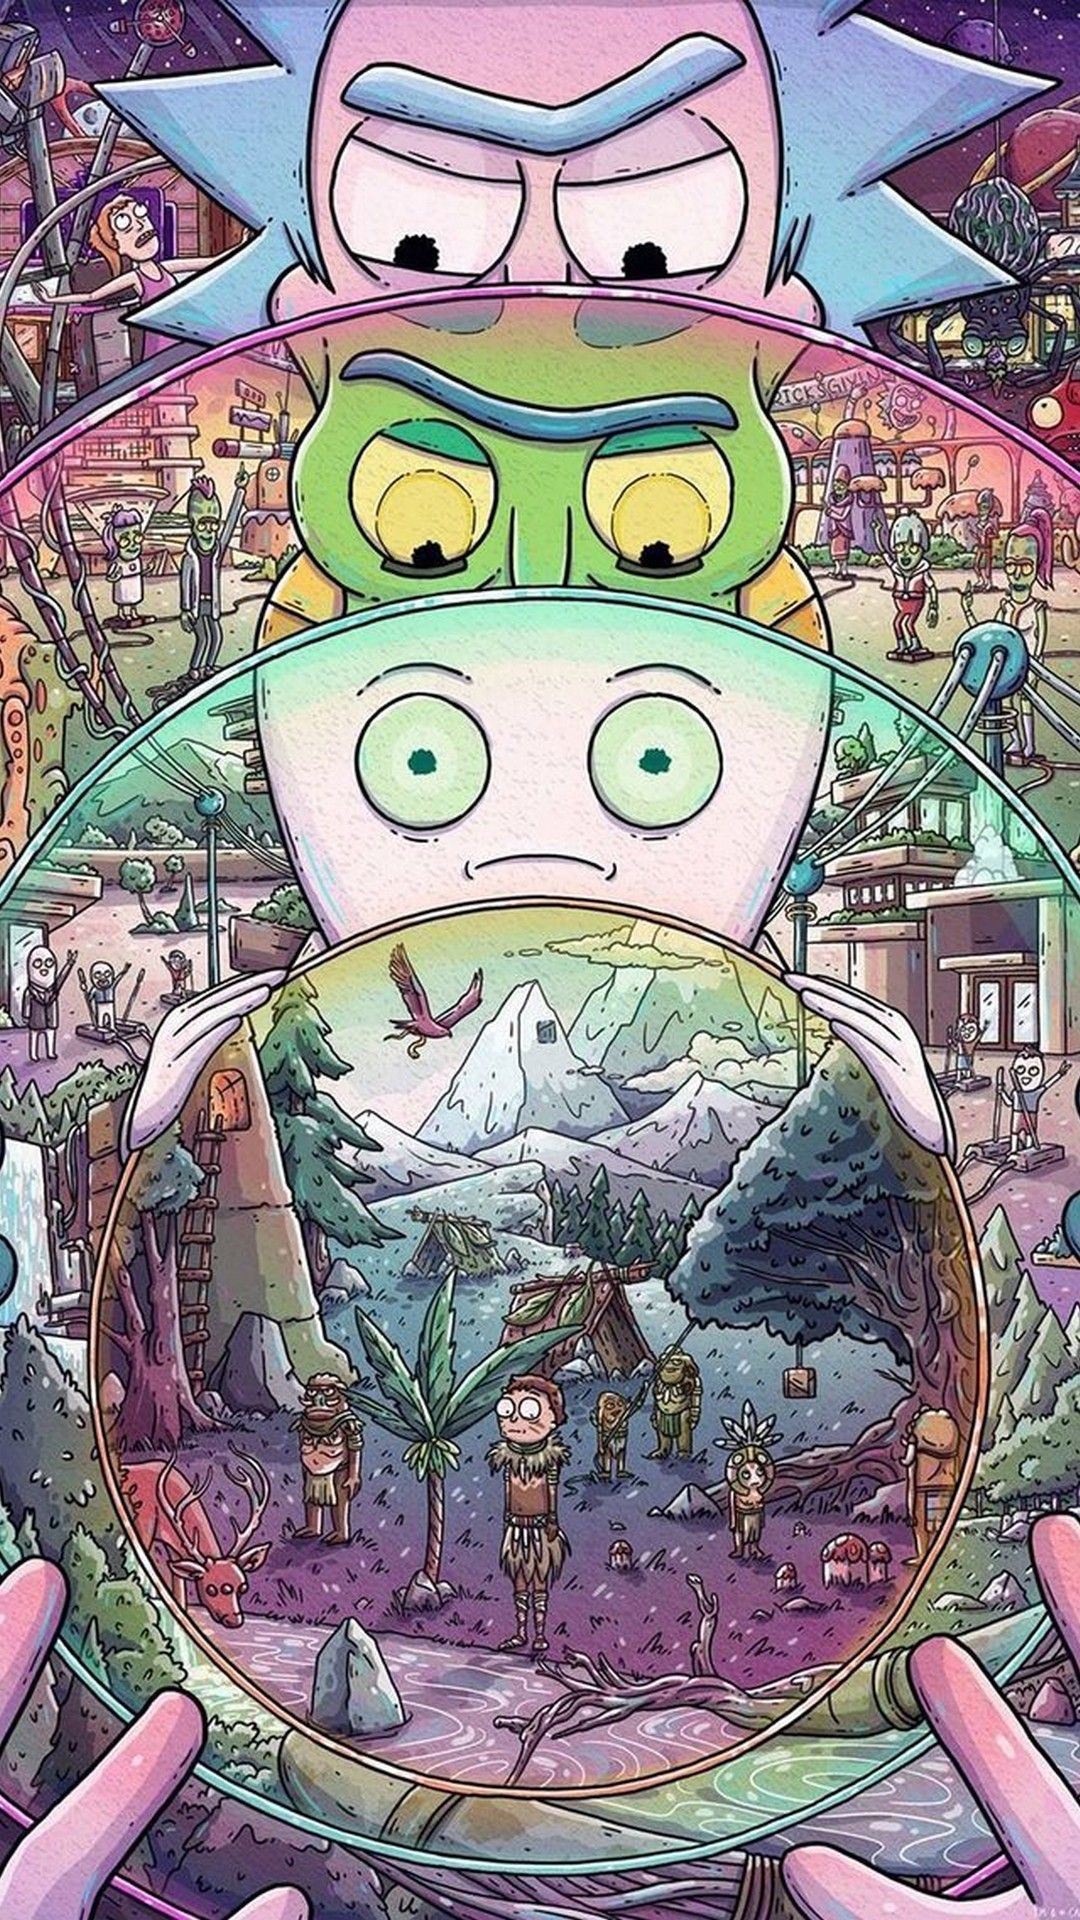 Best Rick and Morty Wallpaper Free Best Rick and Morty Background